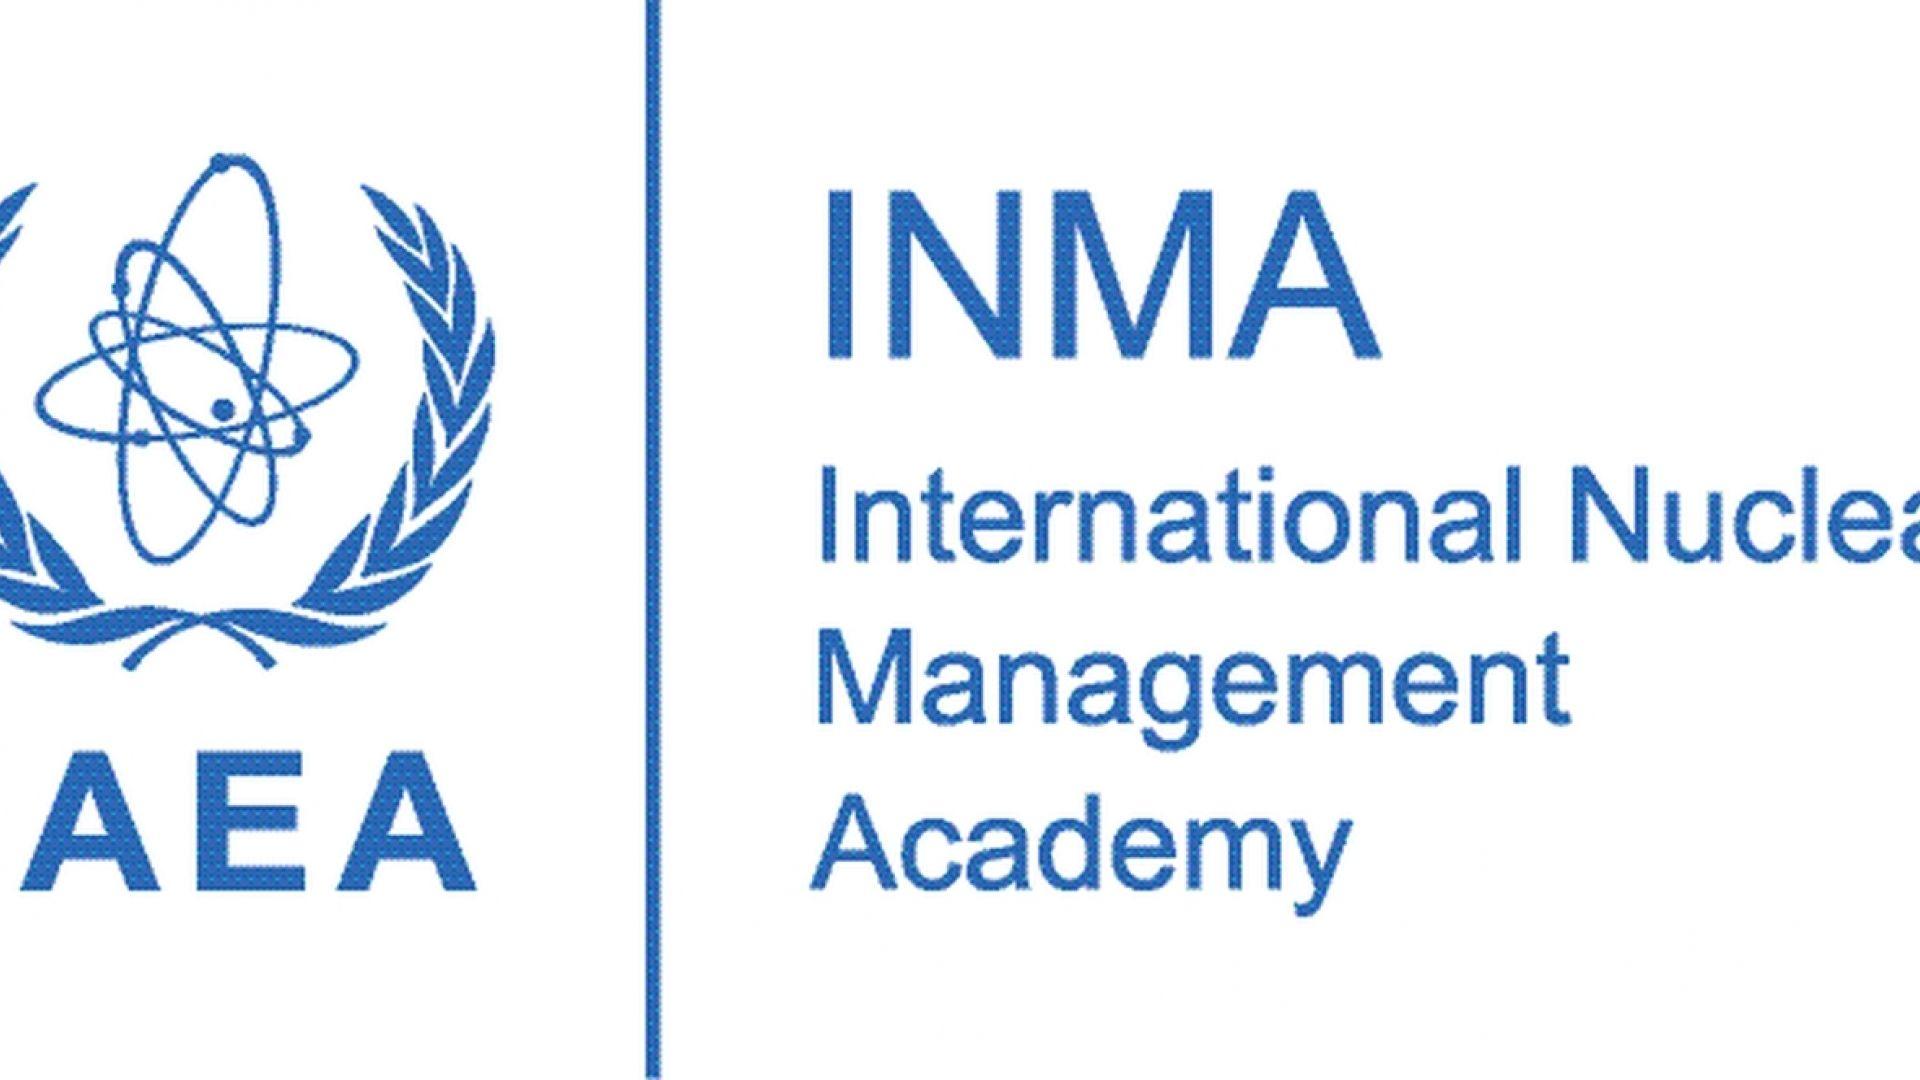 IAEA Logo - The First INMA Full Membership Given to the University of Manchester